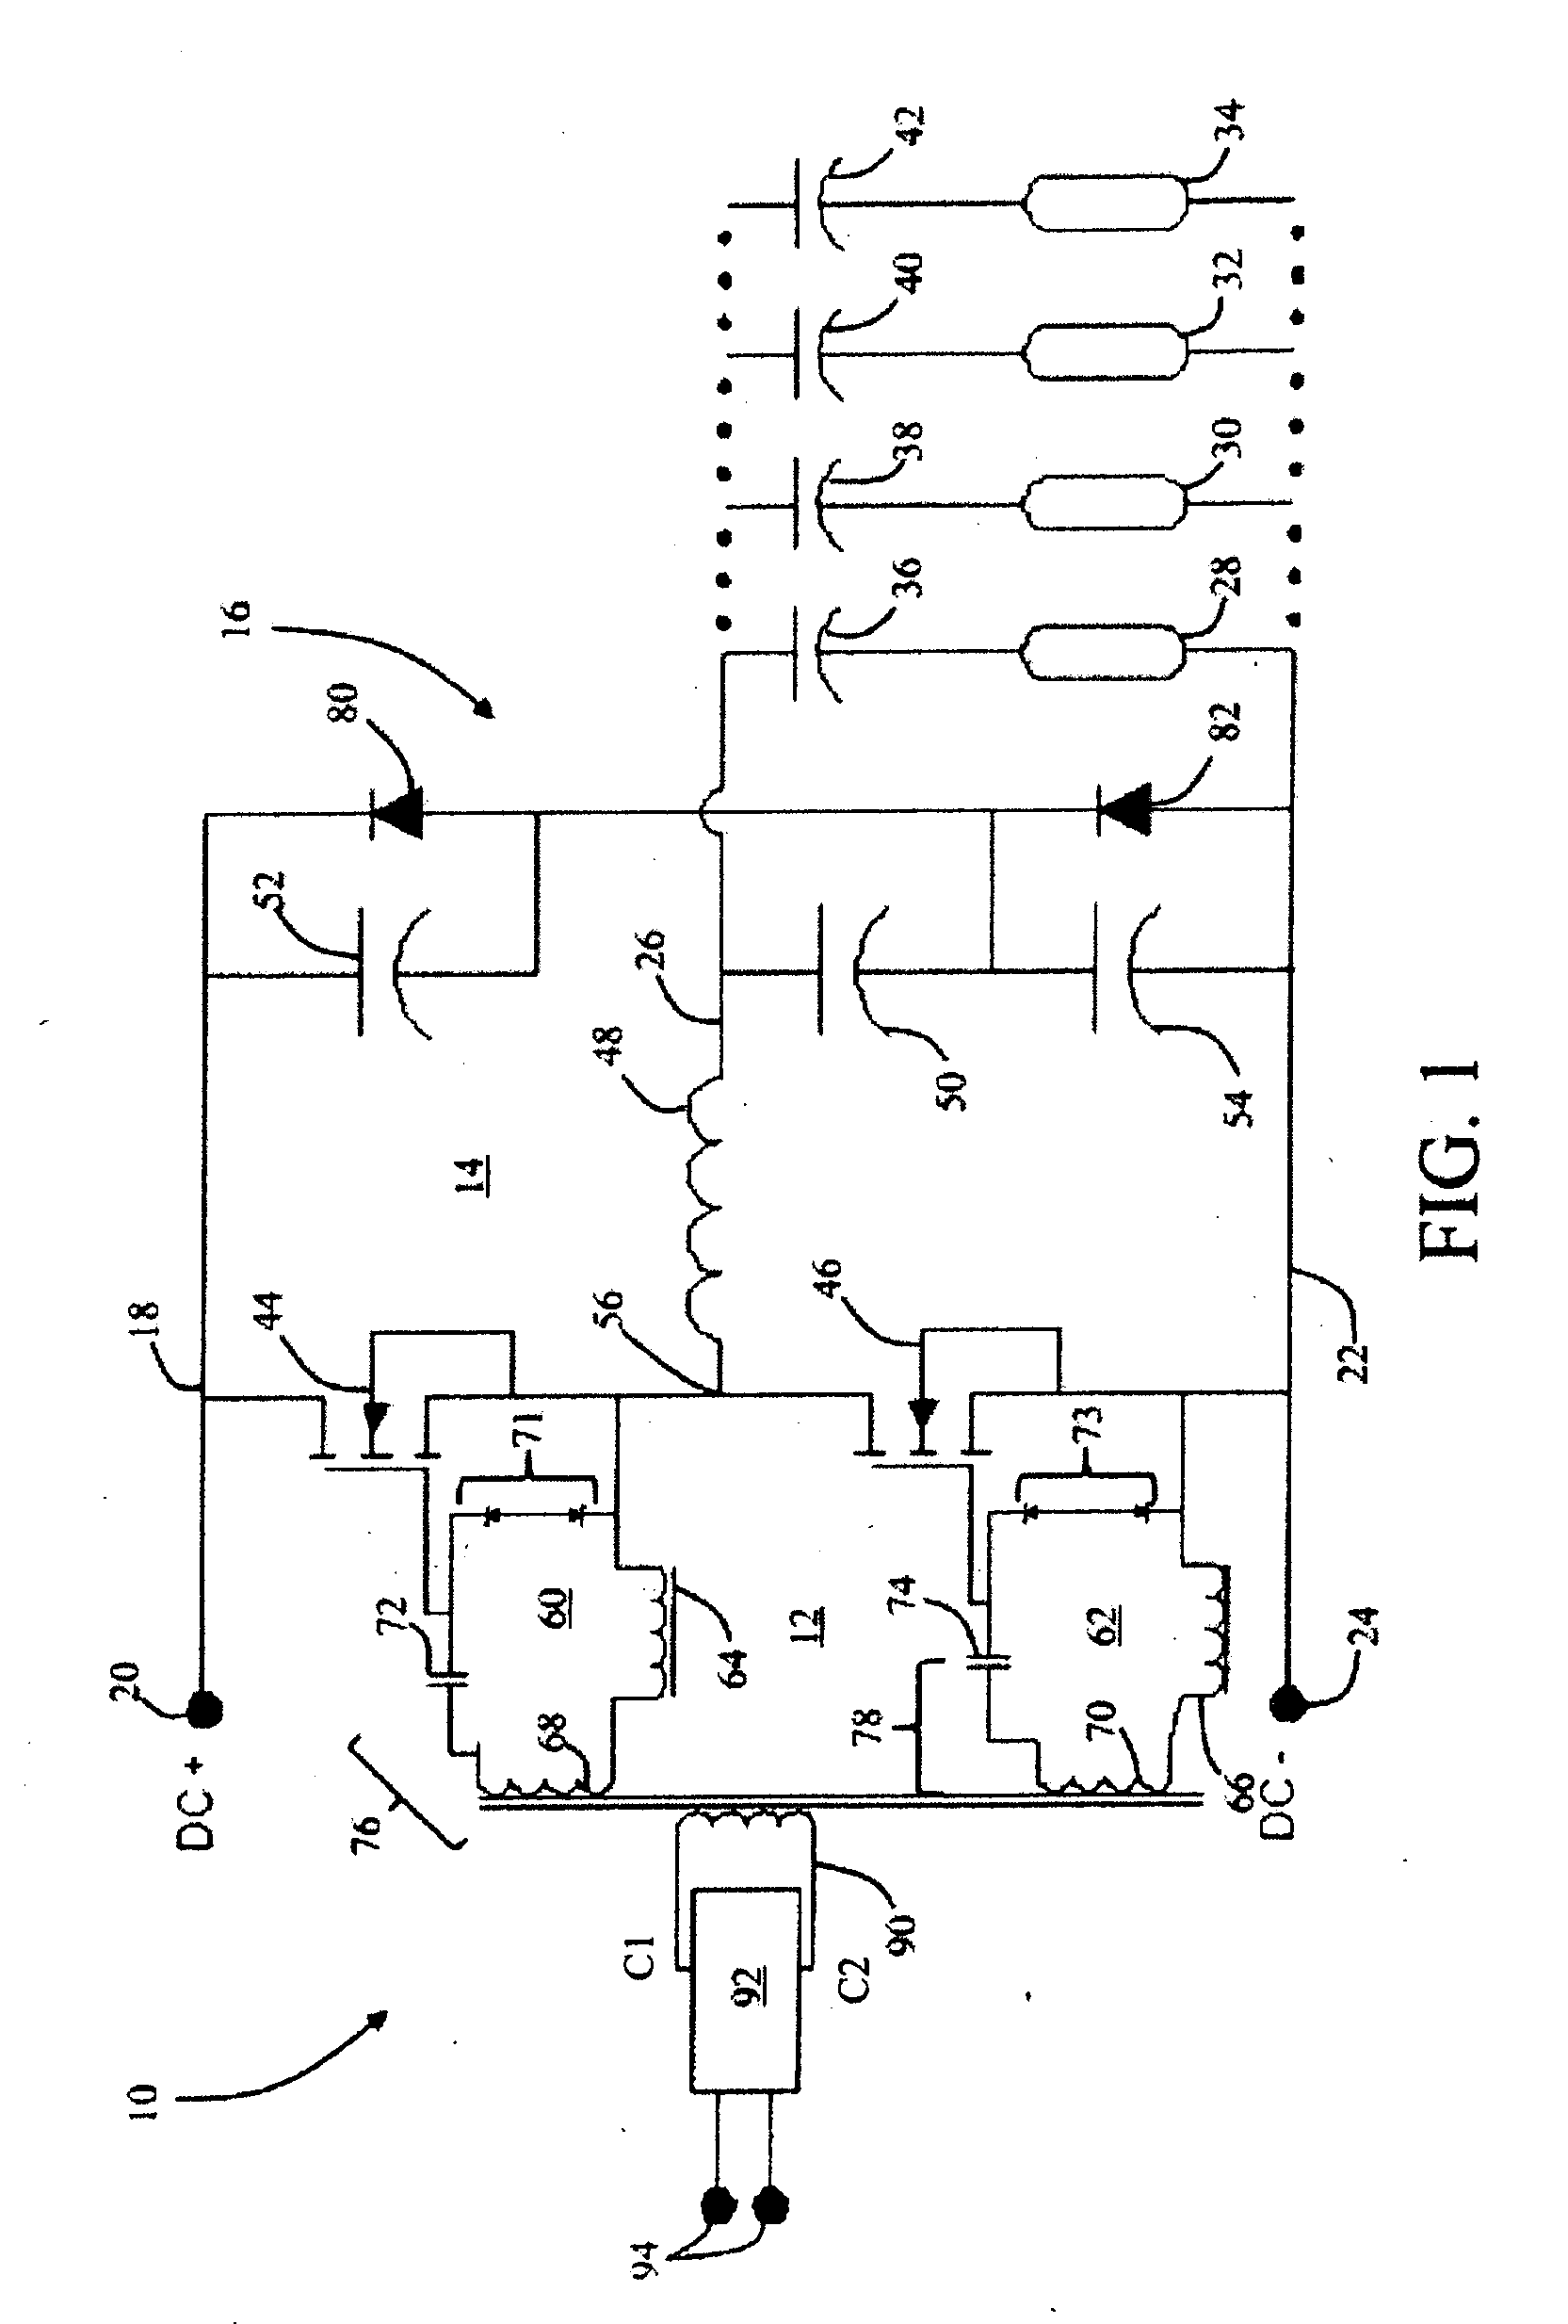 Dimming interface for power line